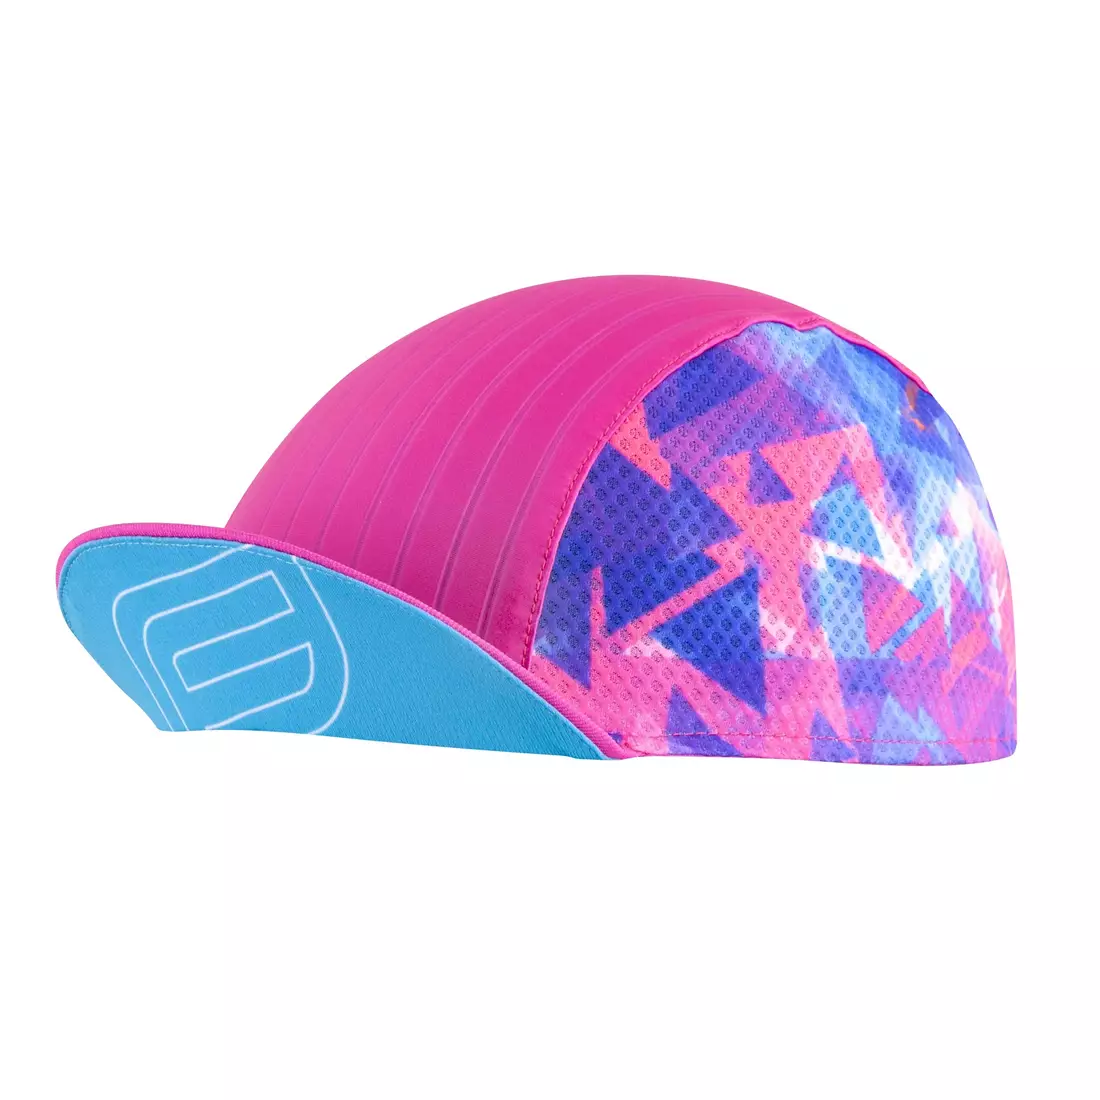 FORCE cycling cap with a visor CORE, pink, 903025